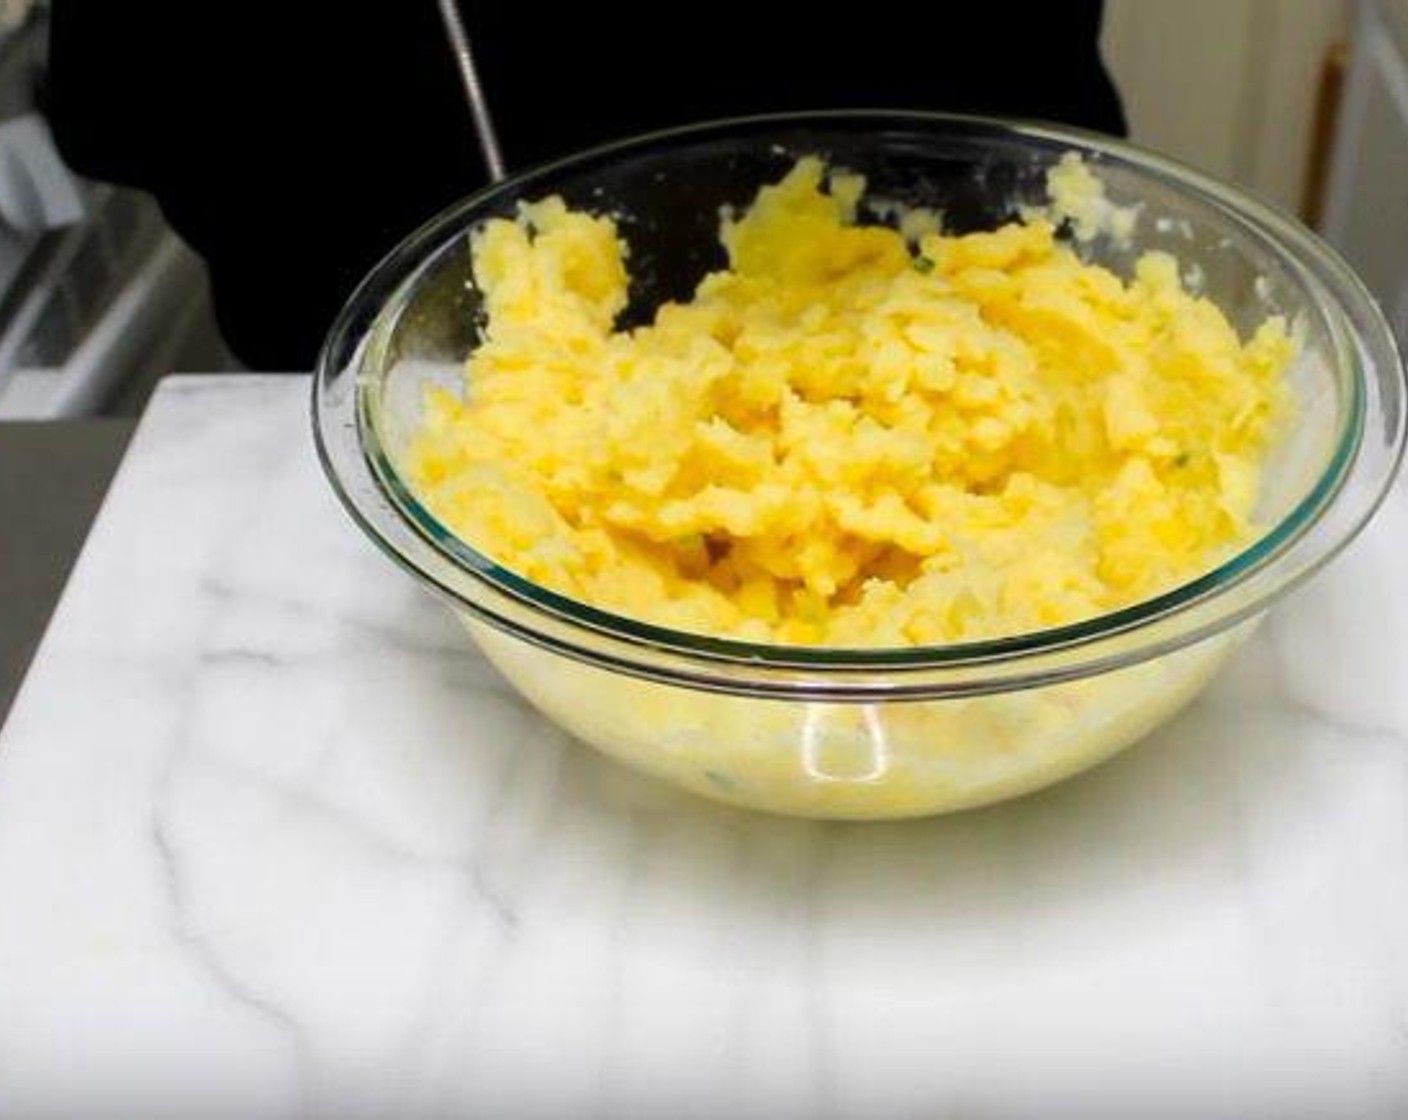 step 2 In a mixing bowl, add cooked Potatoes (2 lb). Pour in the butter and milk mixture a bit at a time, mashing the potatoes as you go.